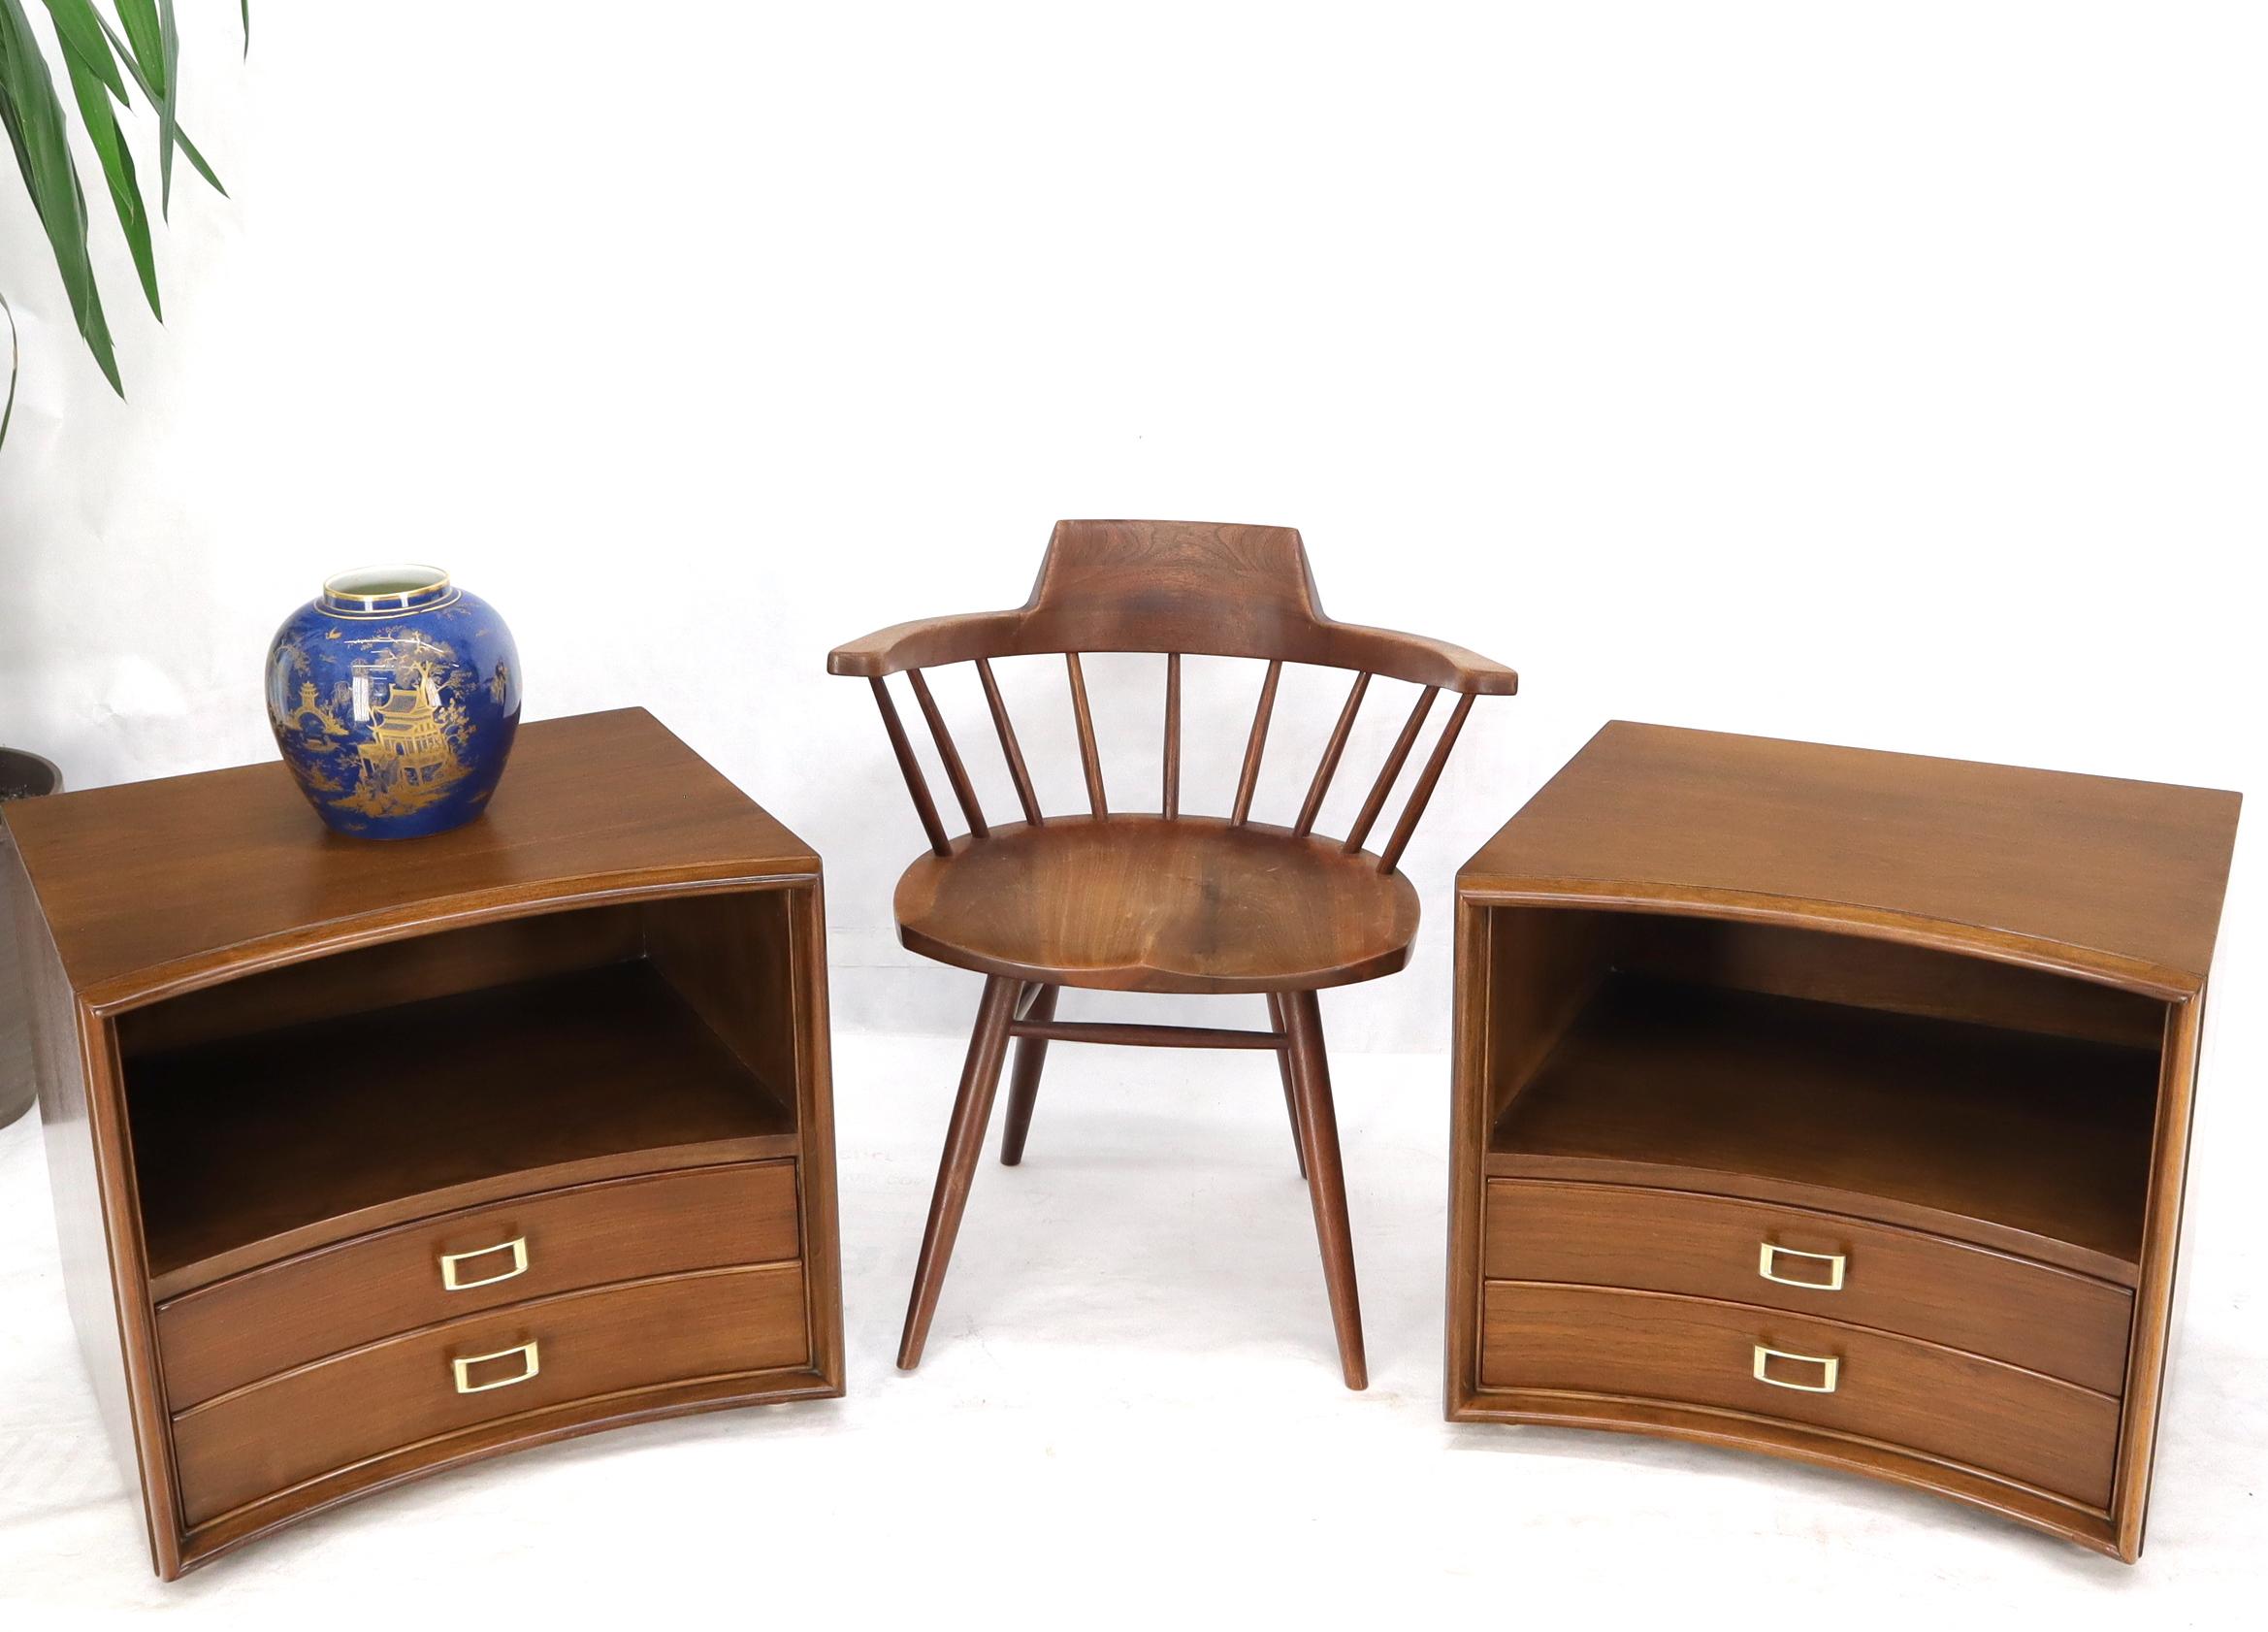 Pair of stunning Mid-Century Modern walnut end tables night stands with solid brass buckle shape pulls.